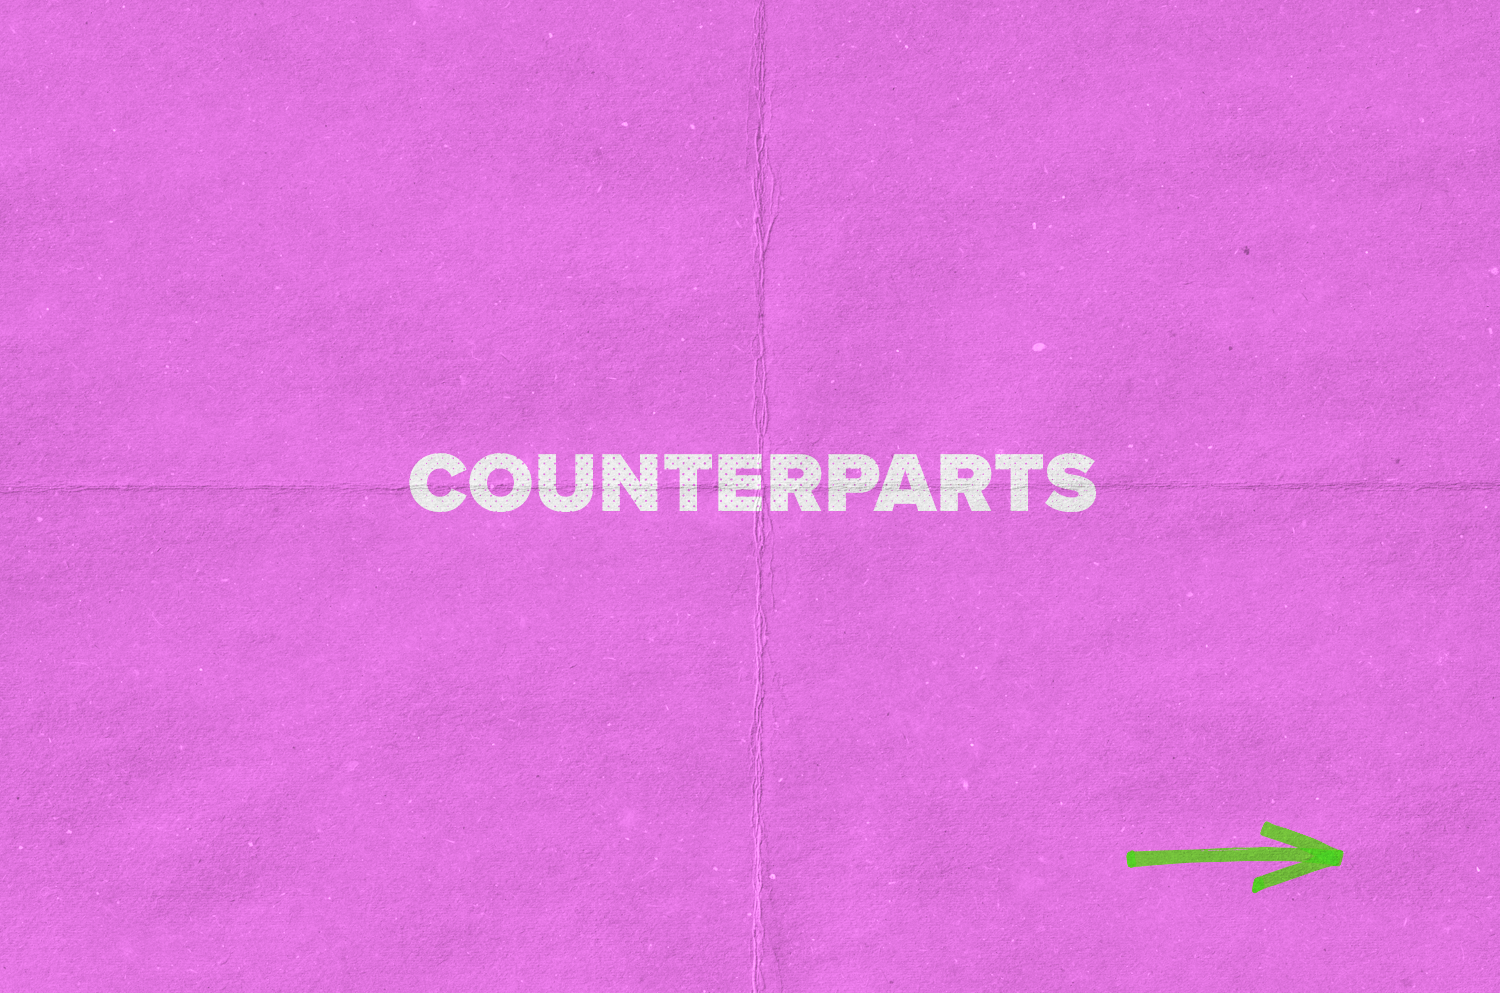 Counterparts_ImageGalleryTitleCard.png